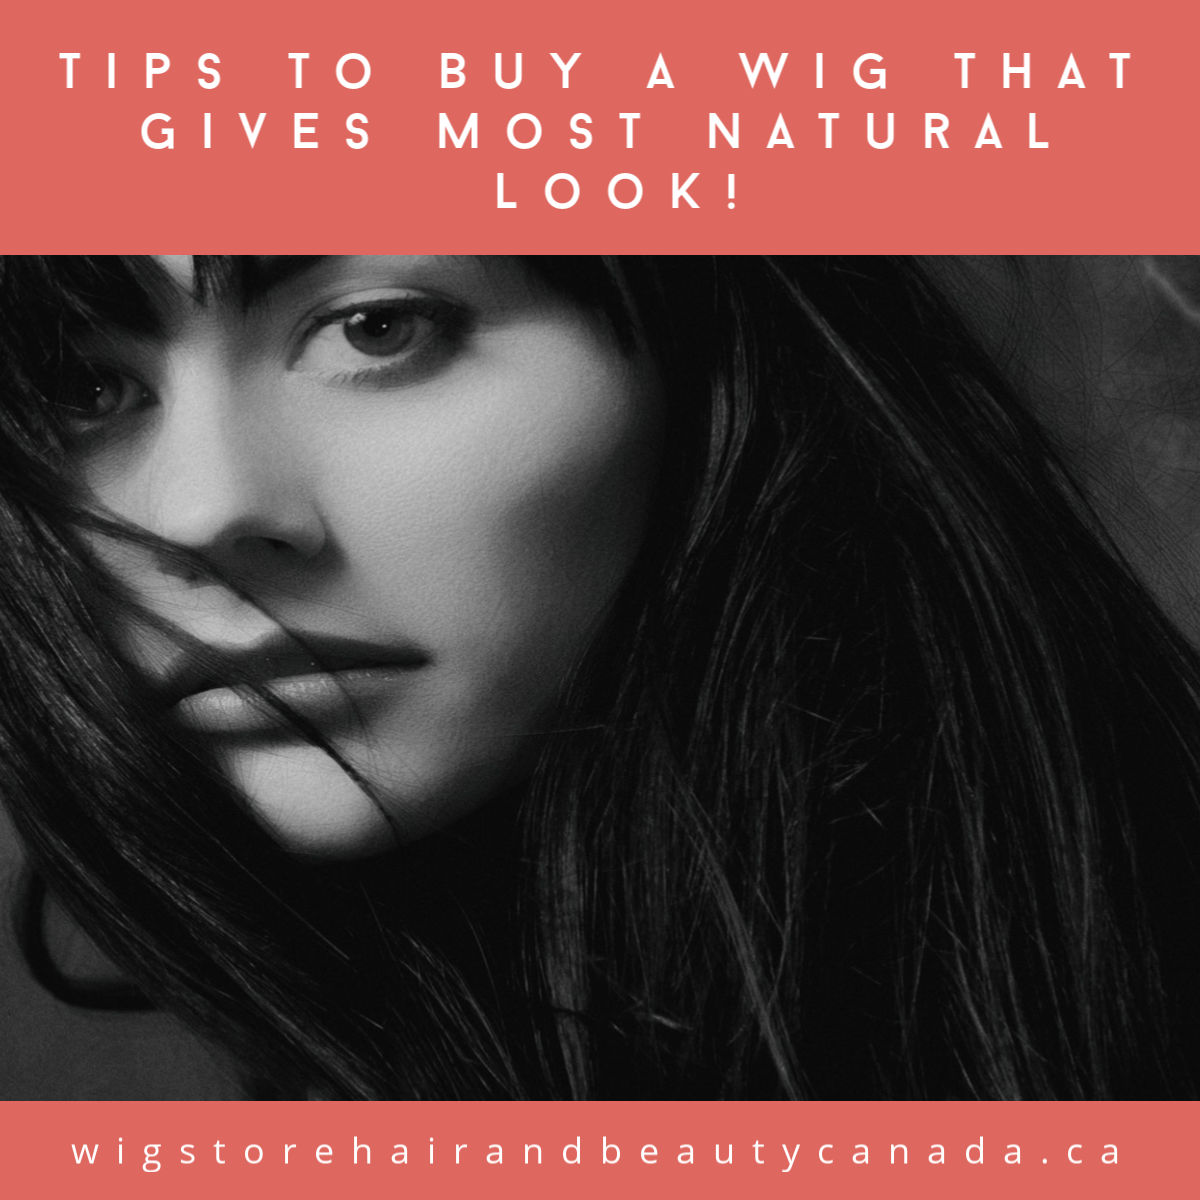 Tips to Buy A Wig That Gives Most Natural Look.jpg